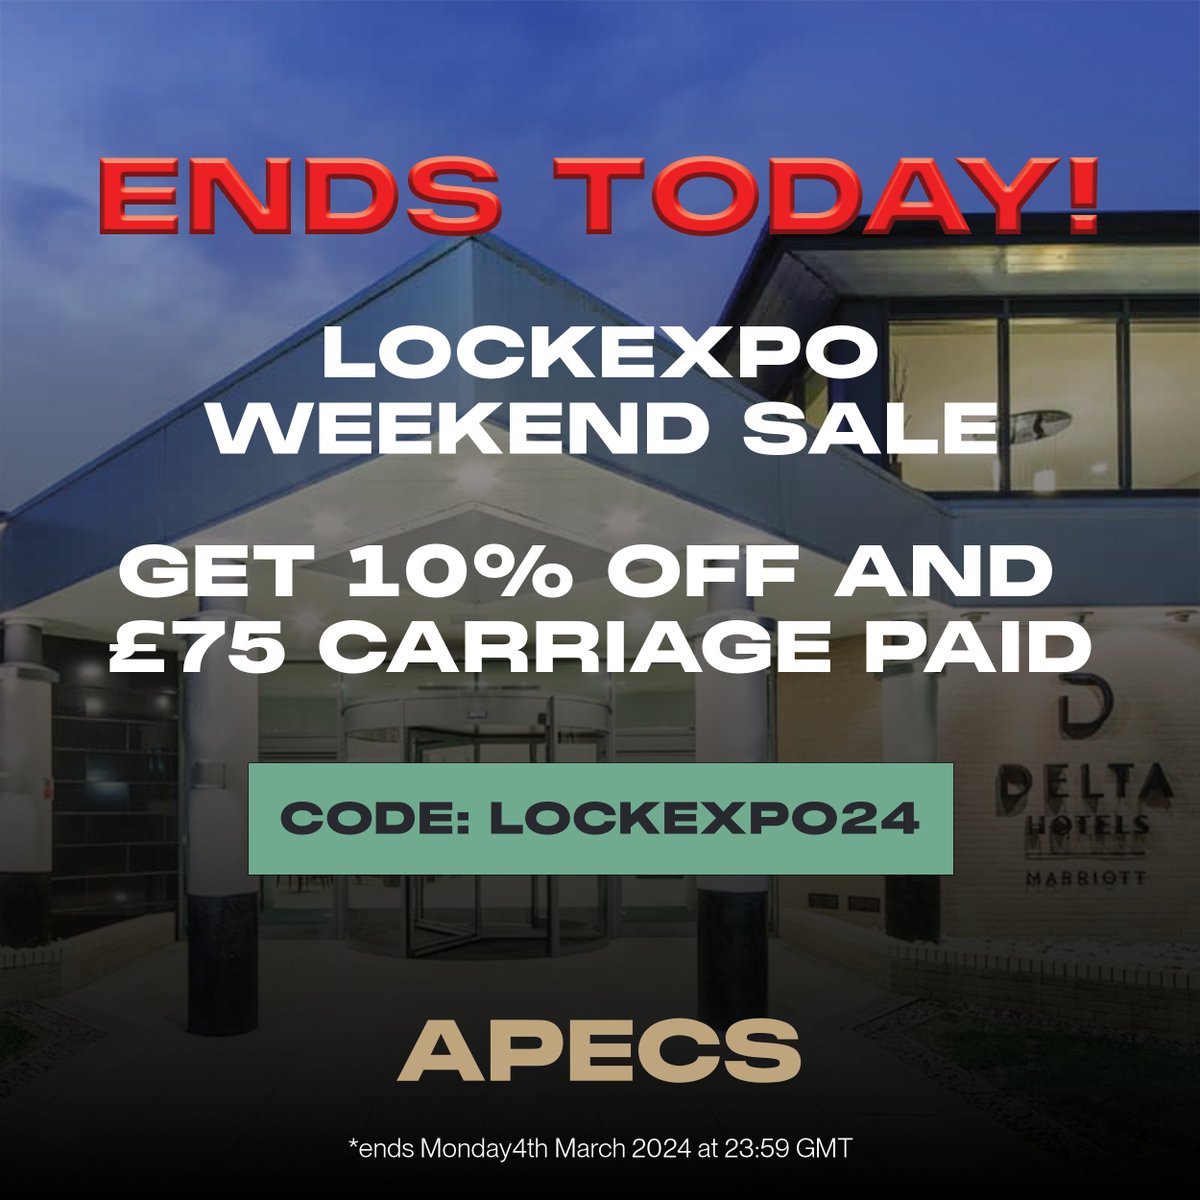 🎉 We hope everyone enjoyed the LockExpo this year! 🎉 Just a quick reminder: today is the LAST DAY to snag our exclusive discount! Don't miss out on savings for across all of the APECS range. Hurry, time's running out! ⏳ #APECS #LastChance #DiscountEndDate #Lockexpo24